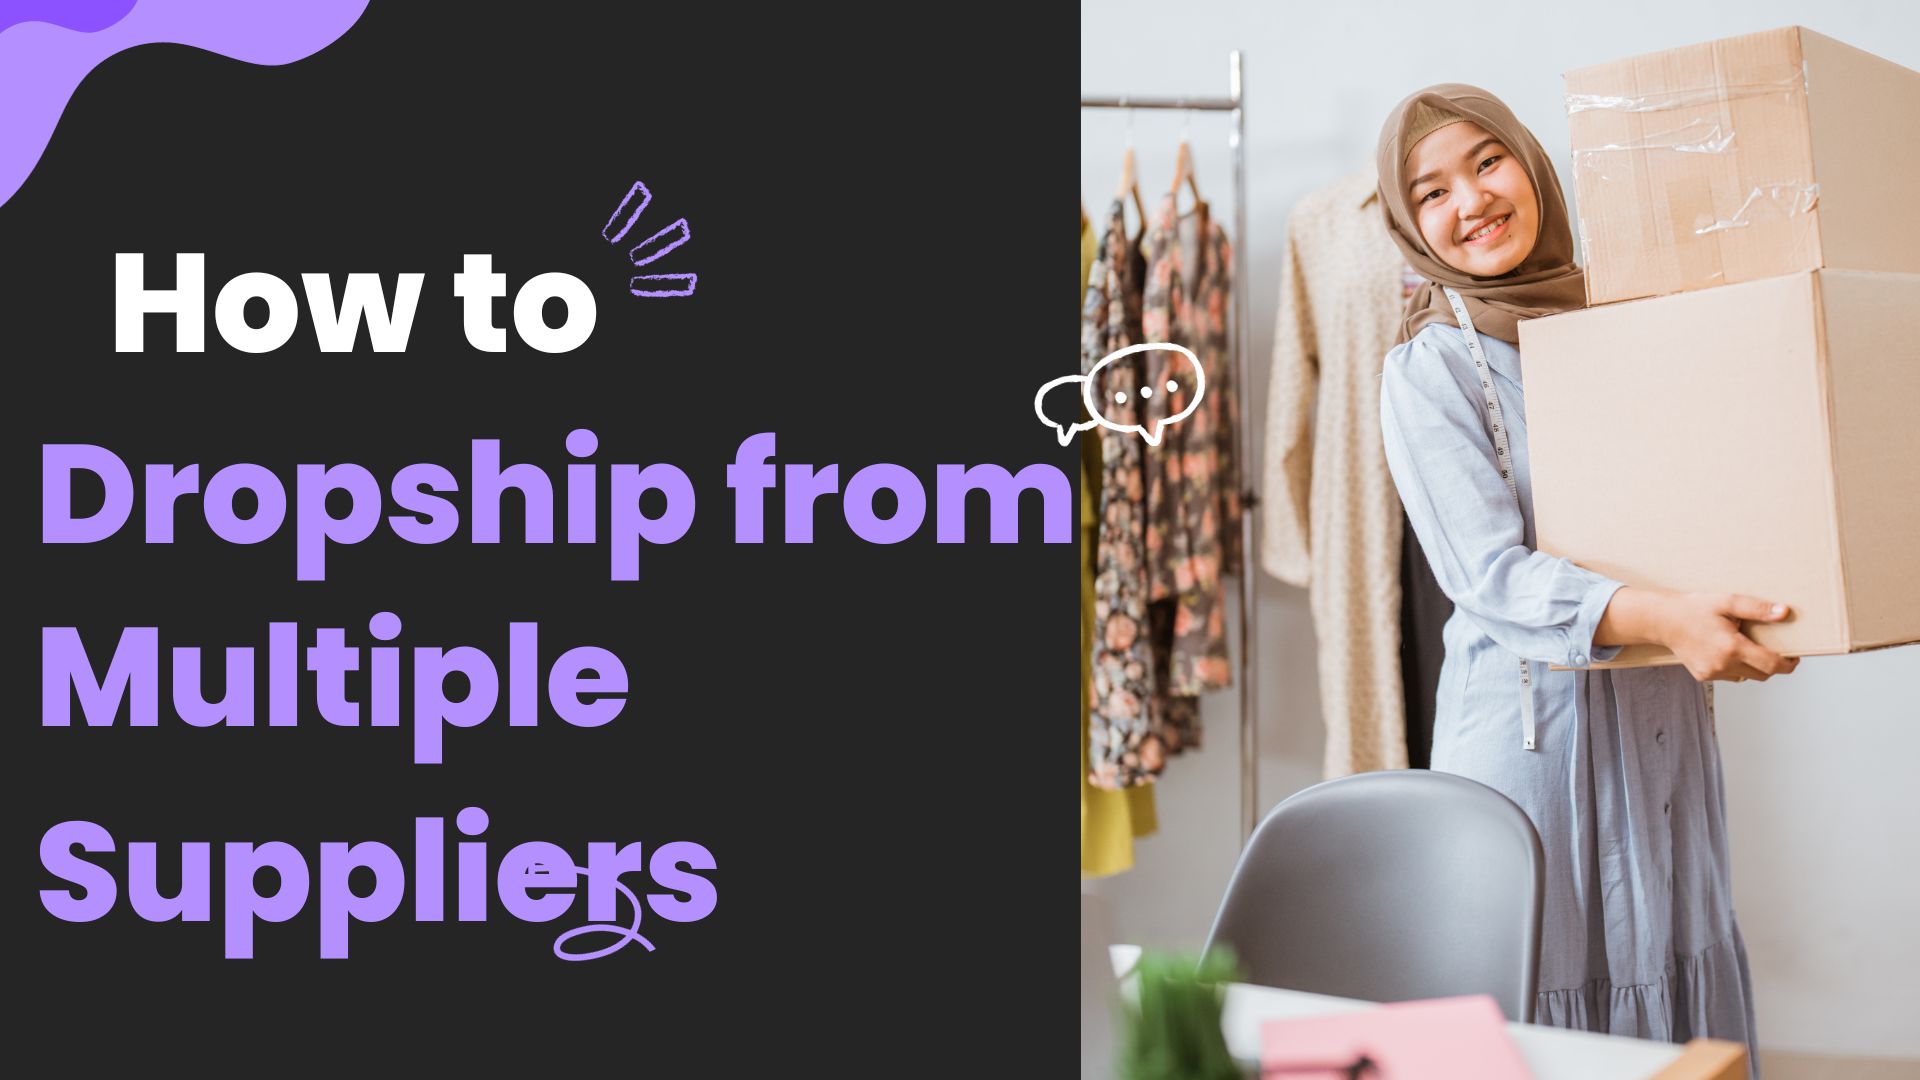 How to Dropship from Multiple Suppliers